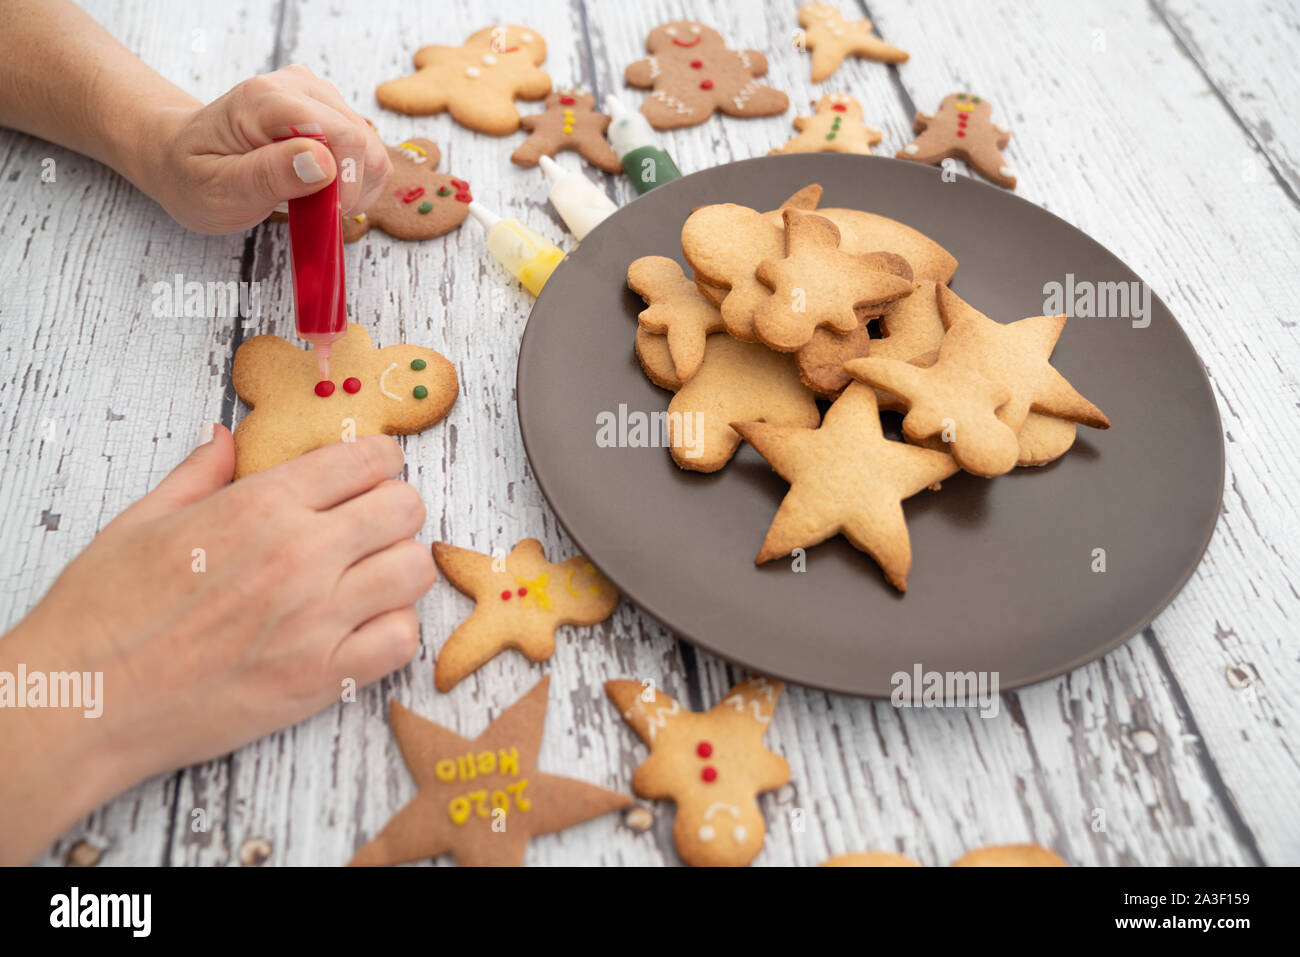 Preparing traditional gingerbread cookies for new year celebration. Stock Photo